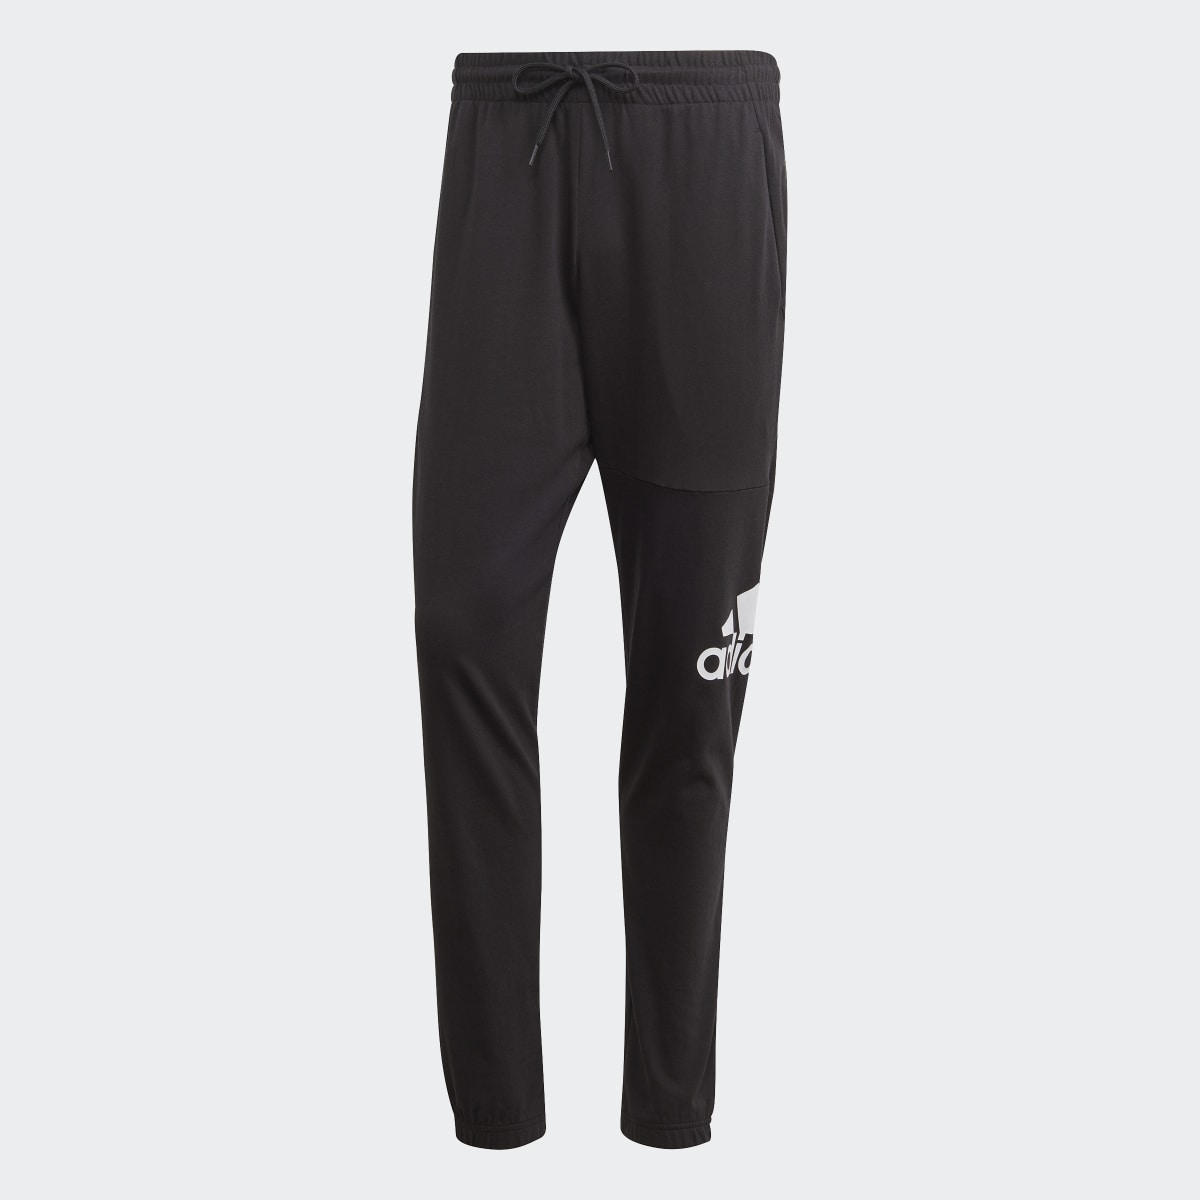 Adidas Essentials Single Jersey Tapered Badge of Sport Pants. 4